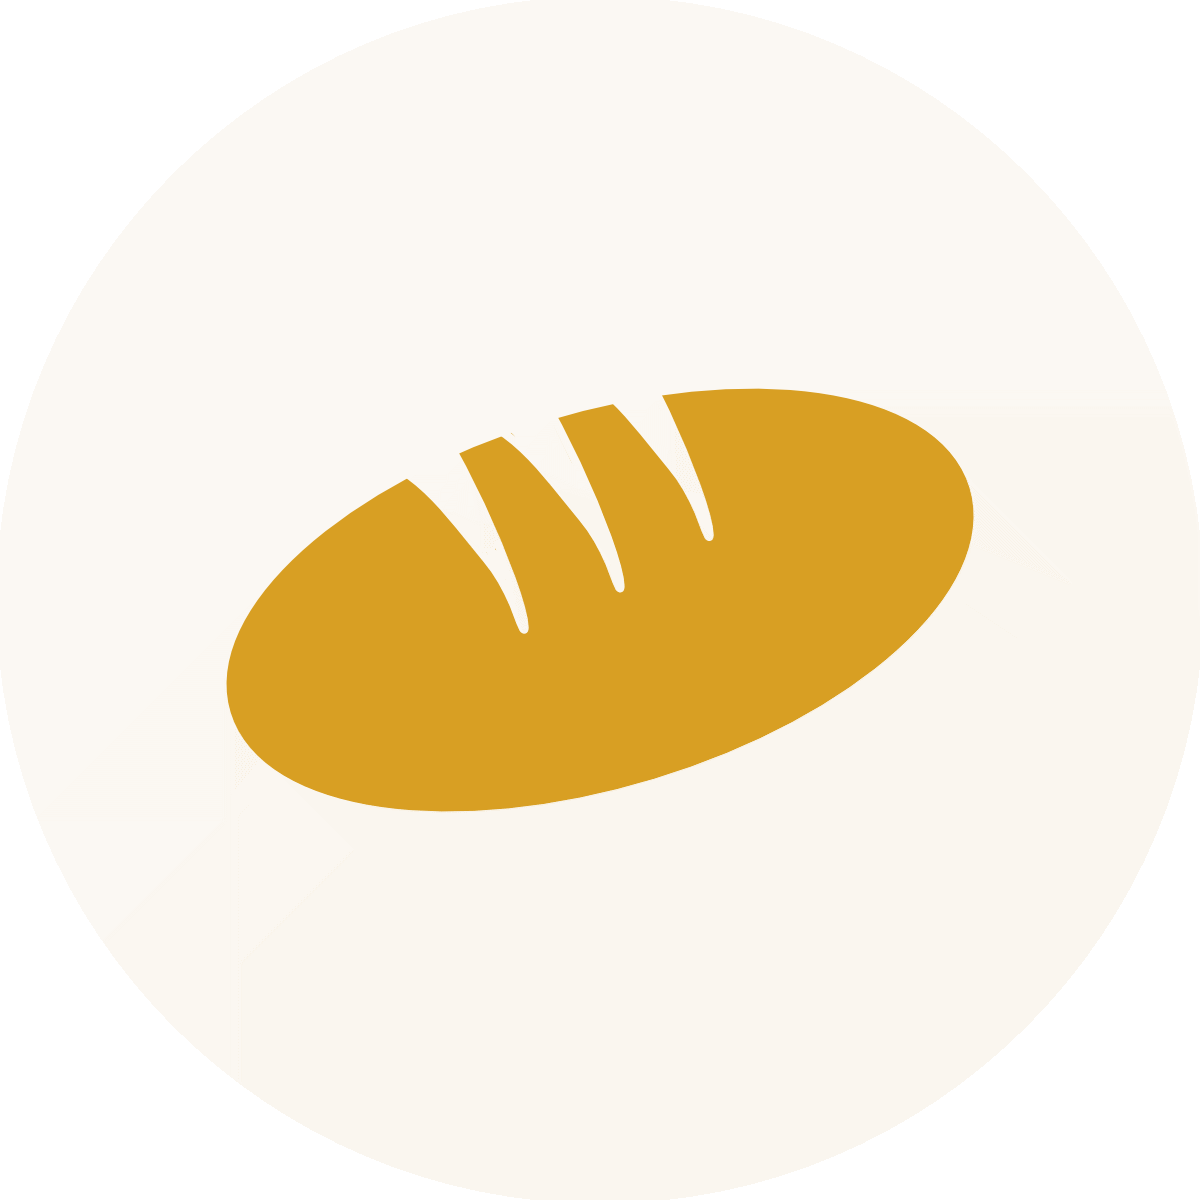 Clipart of a yellow loaf of bread.